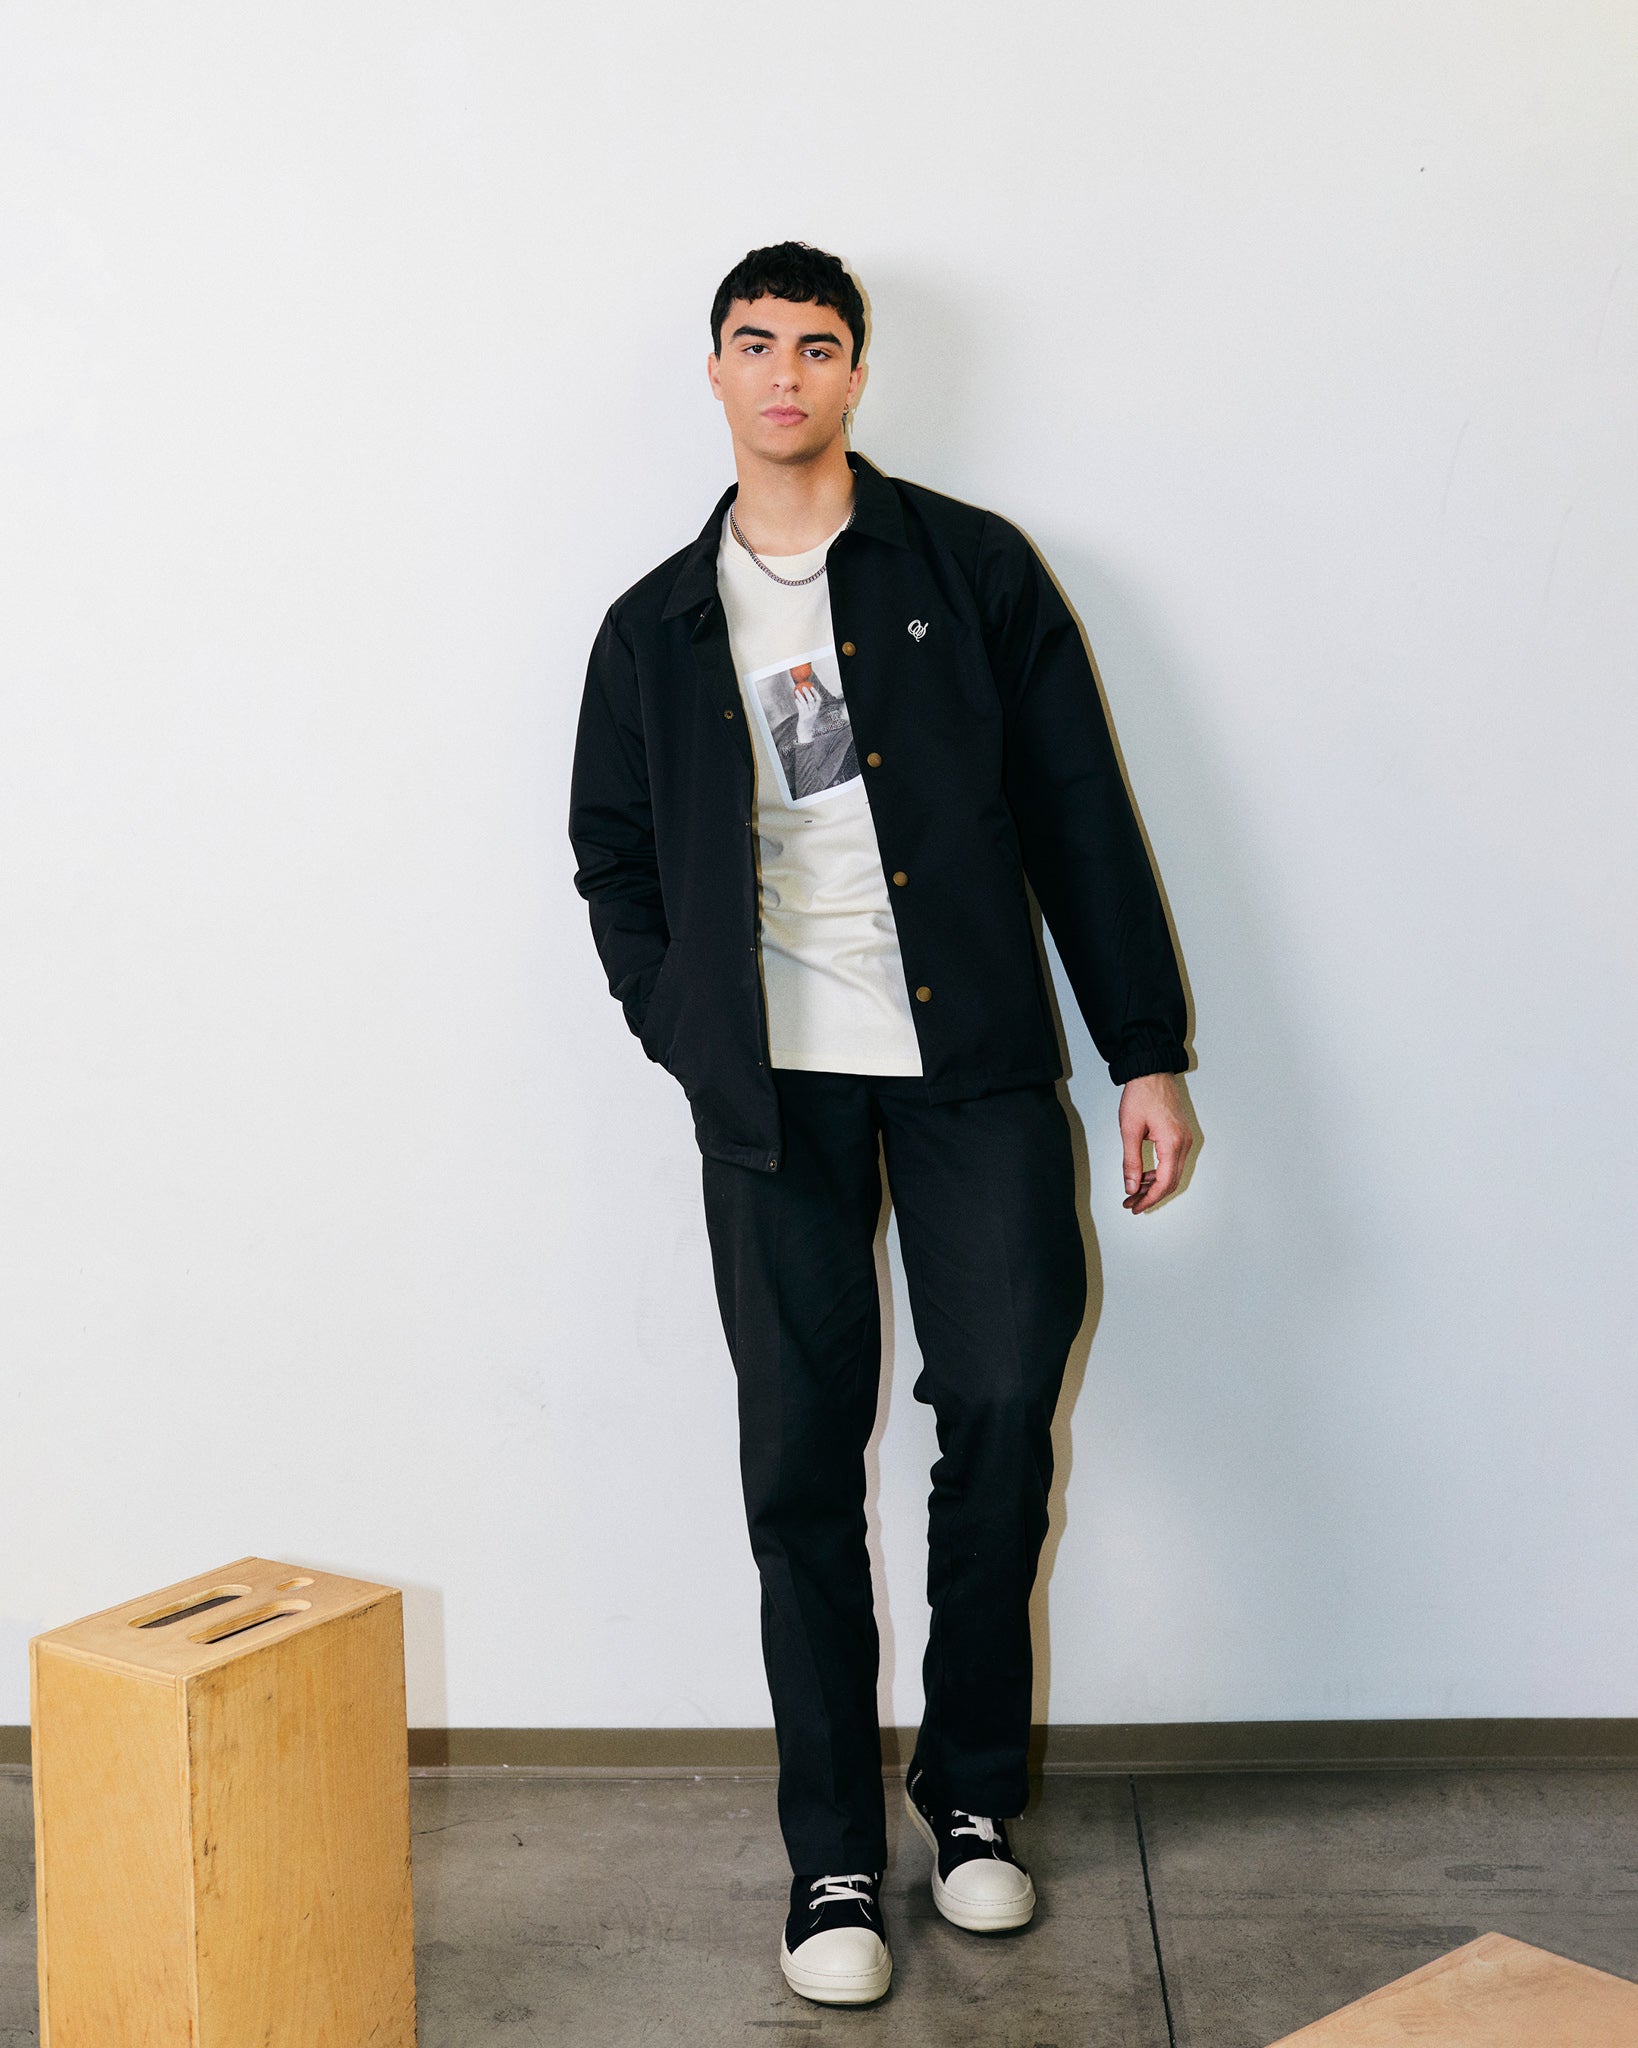 Arjang Mahdavi wears Black Mid-Weight Artist Smock Jacket with embroidered Outsider Supply Script. 100% Nylon. 